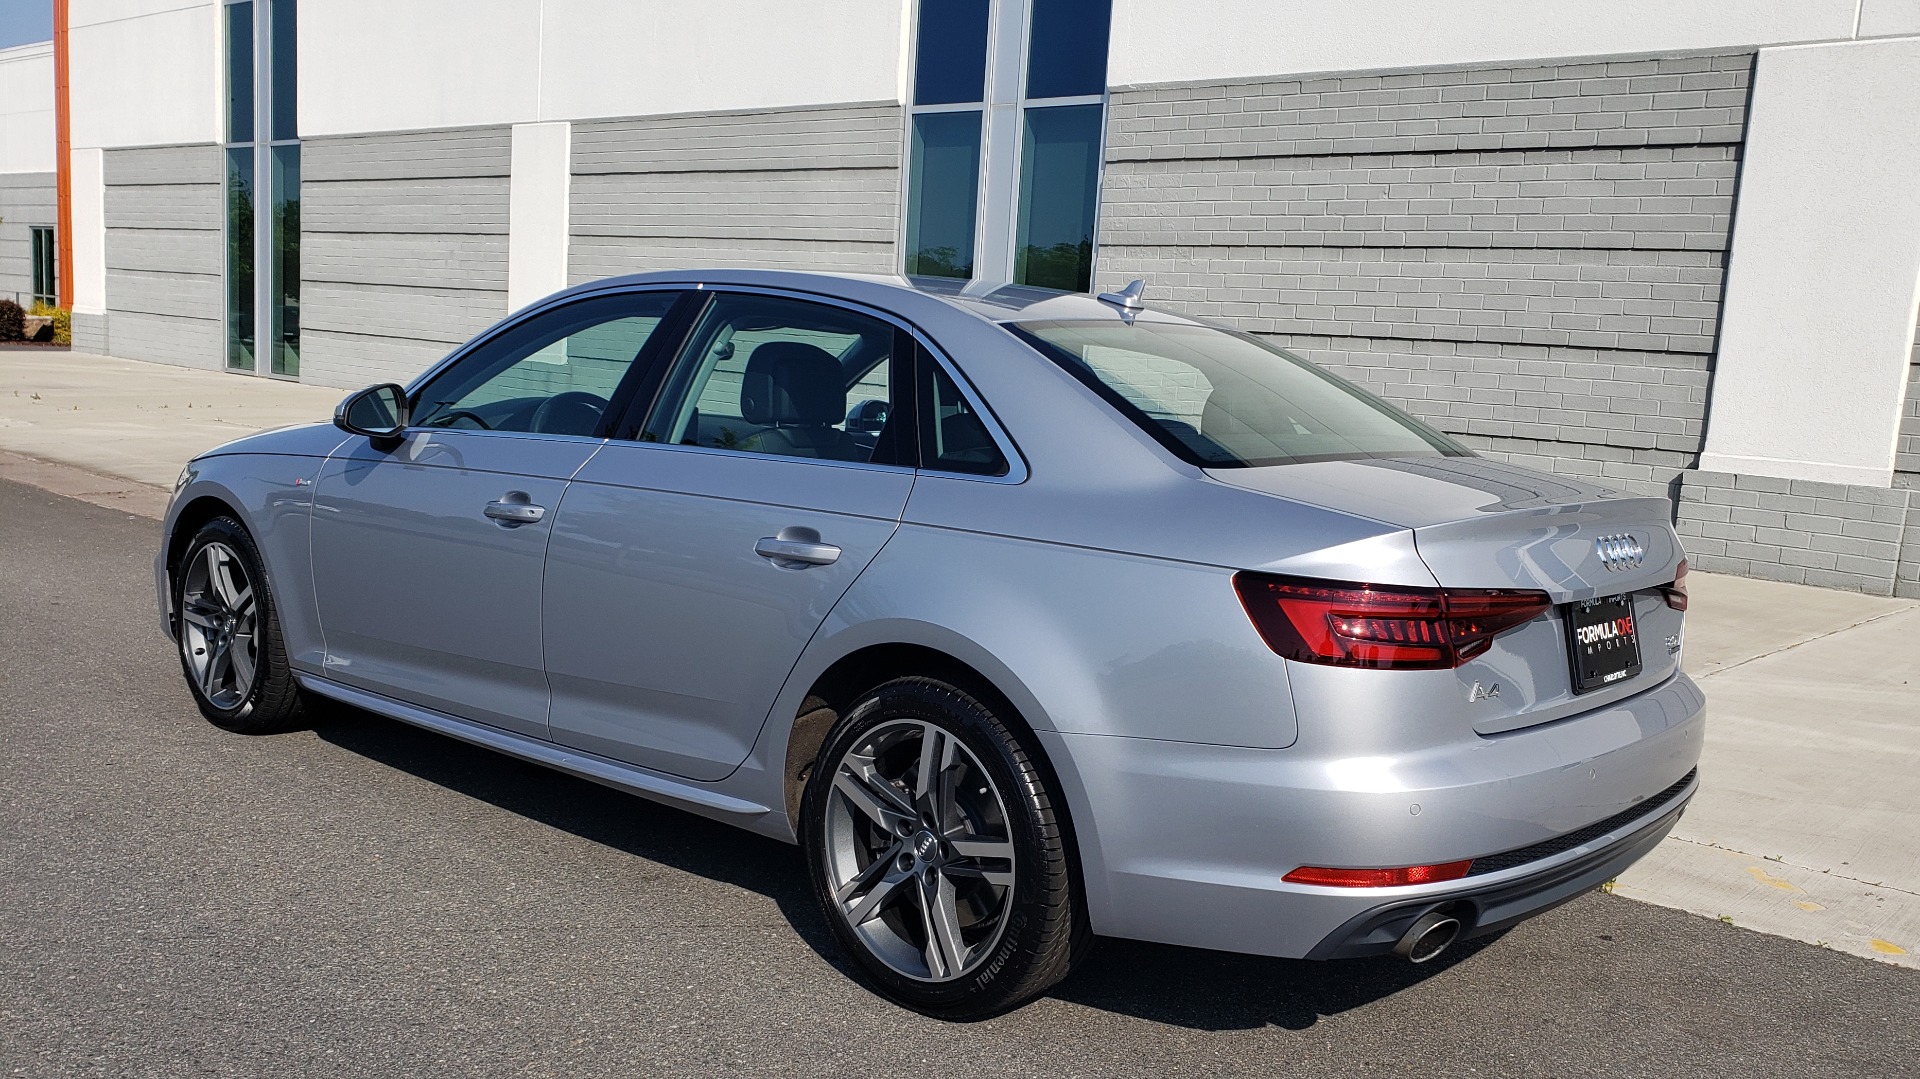 Used 2018 Audi A4 PREMIUM PLUS 2.0T / NAV / SUNROOF / B&O SND / CLD WTHR / REARVIEW for sale Sold at Formula Imports in Charlotte NC 28227 7